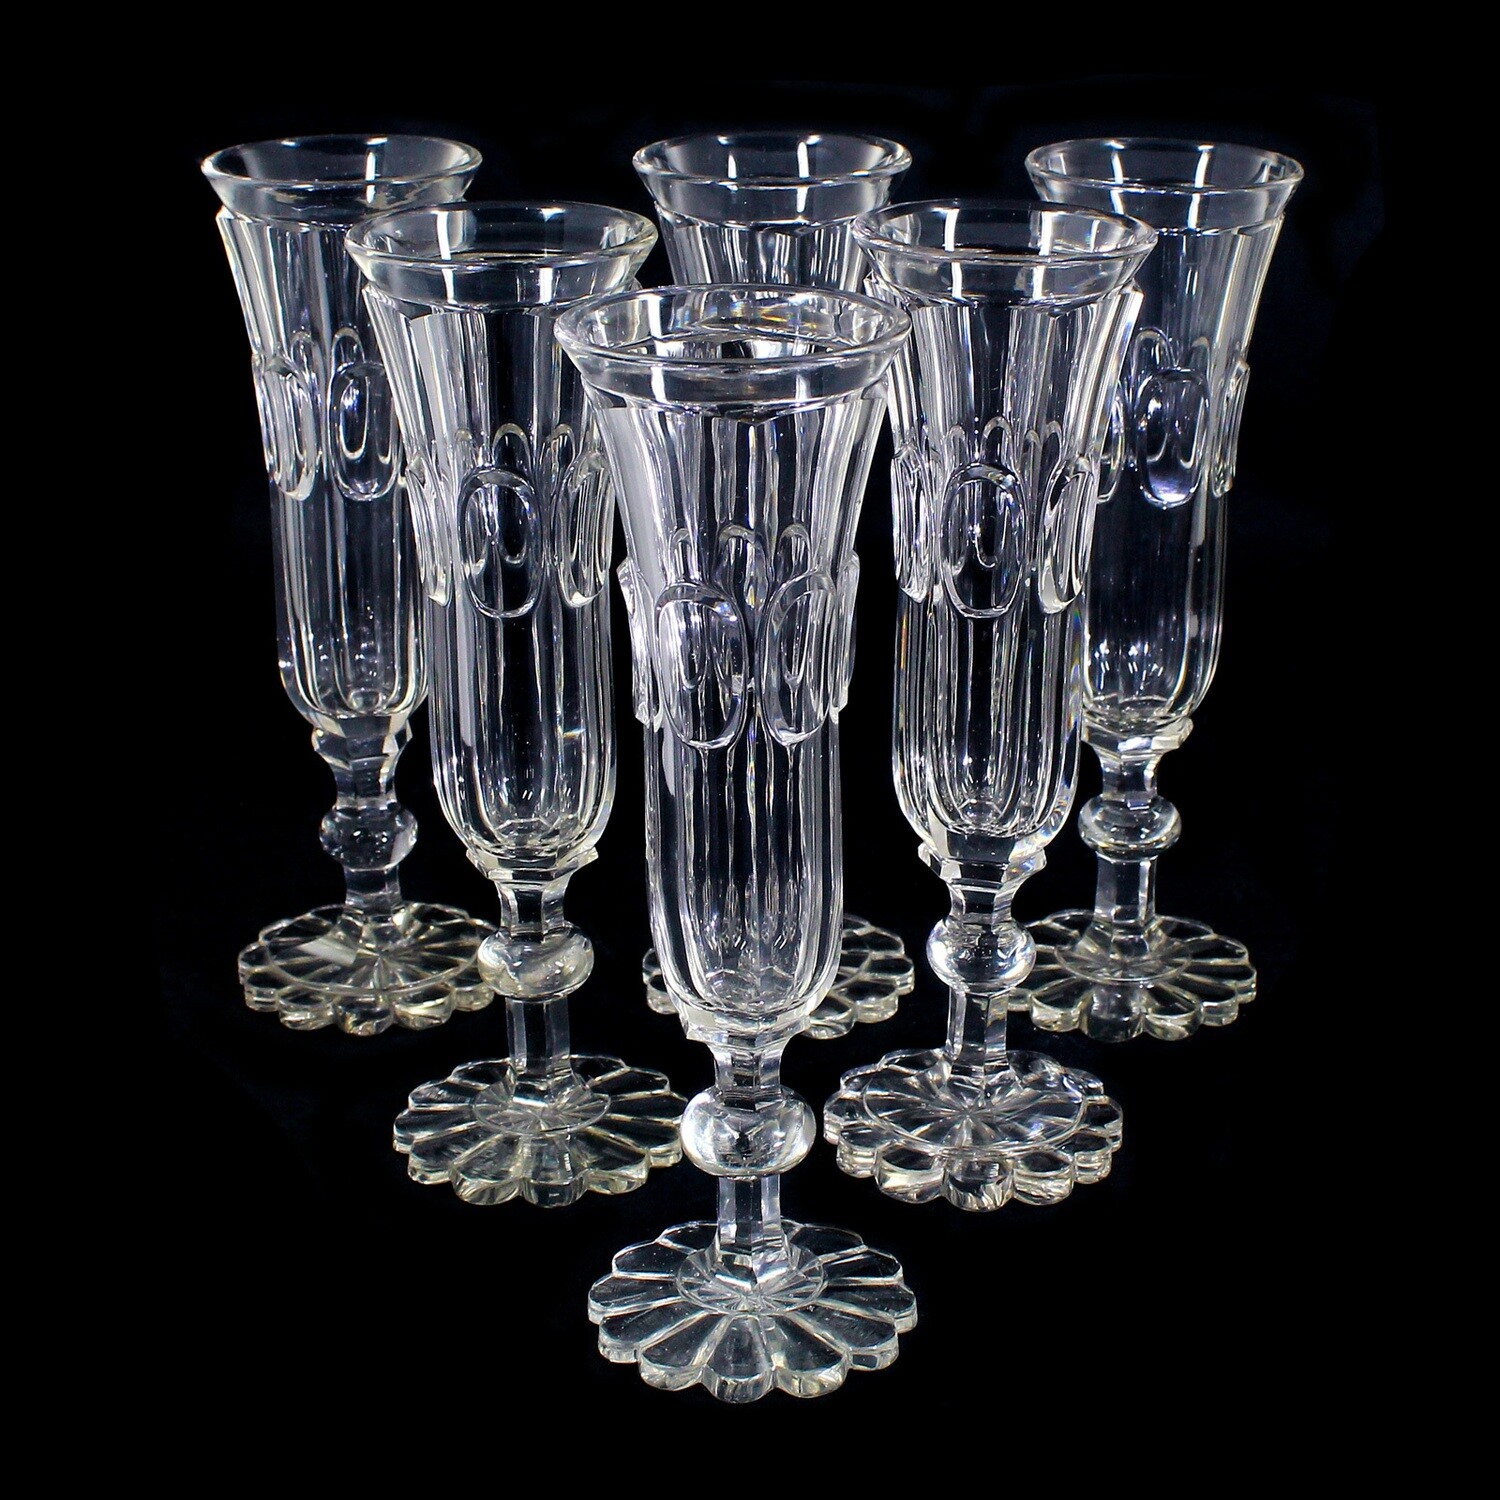 6 Biedermeier champagne flutes made of colorless glass with a highly cut oval medallion